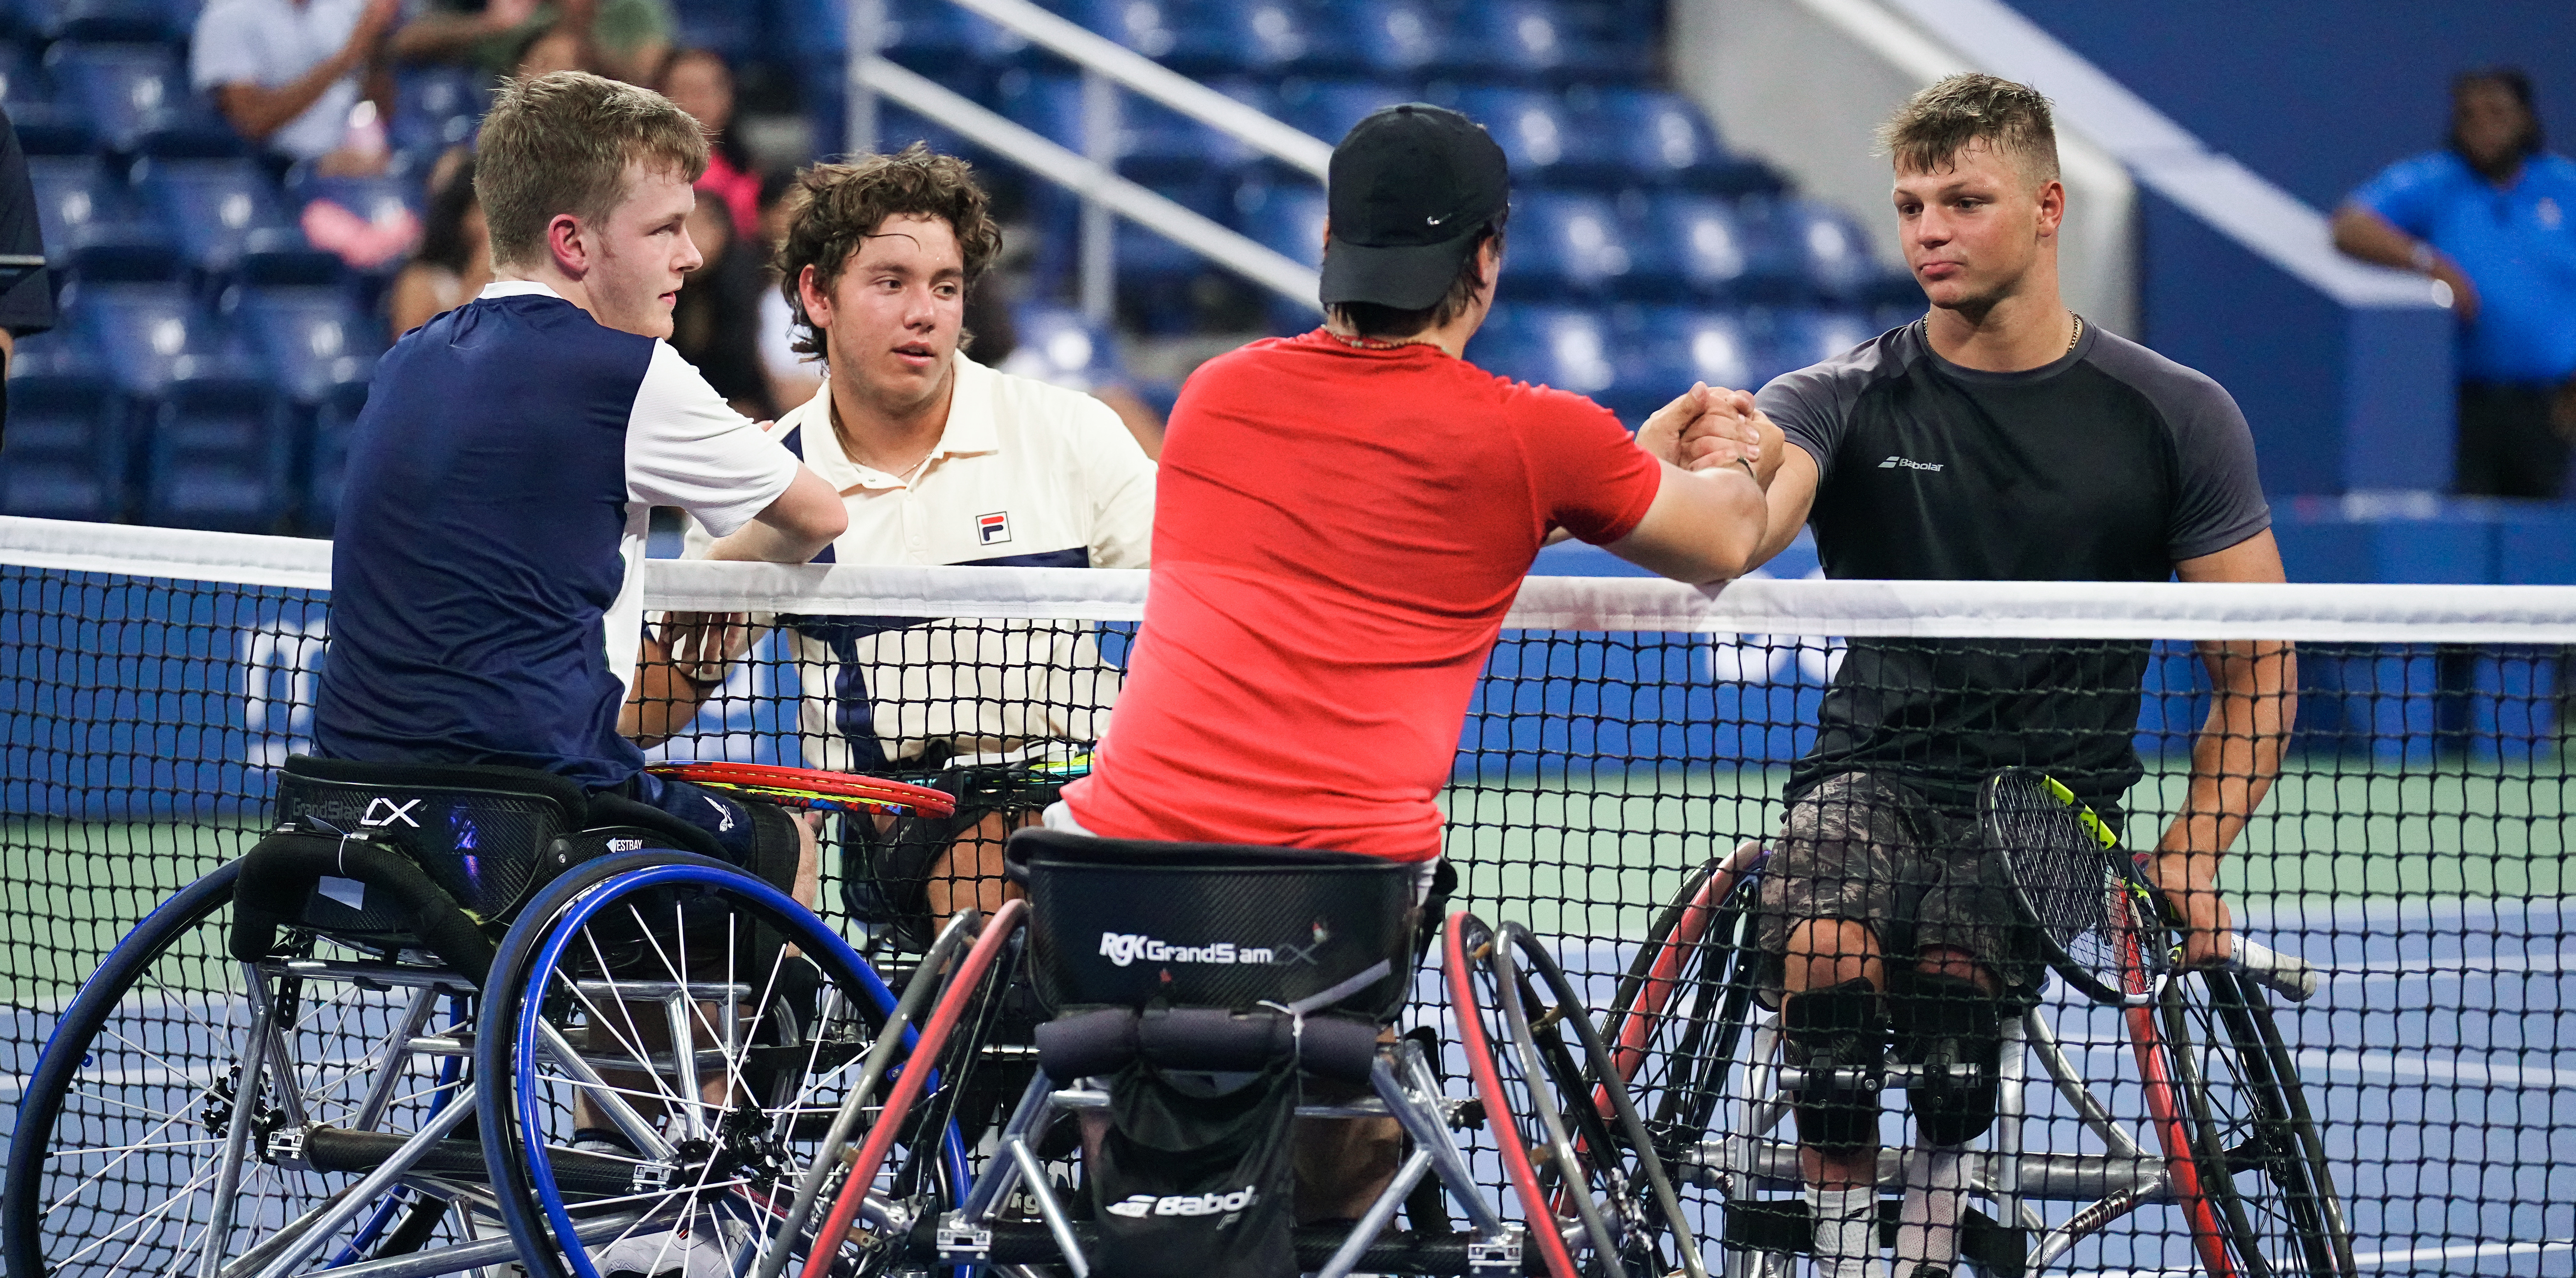 Tomas shaking hands across the net with his competitor in the US Open